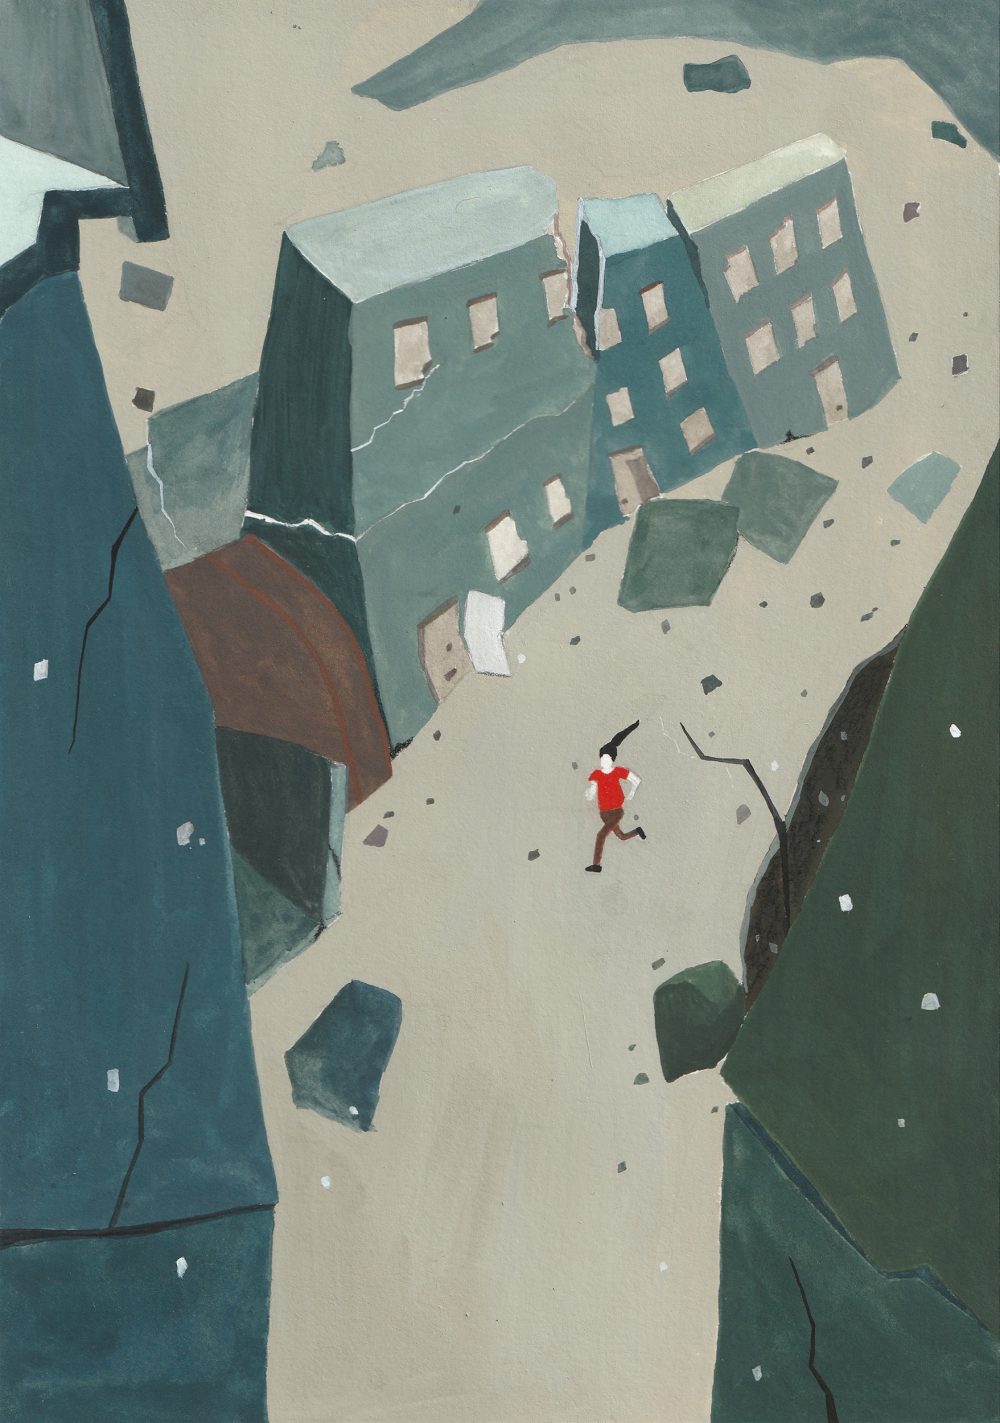 A gouache painting about a girl escaping as the world crumbles around her.